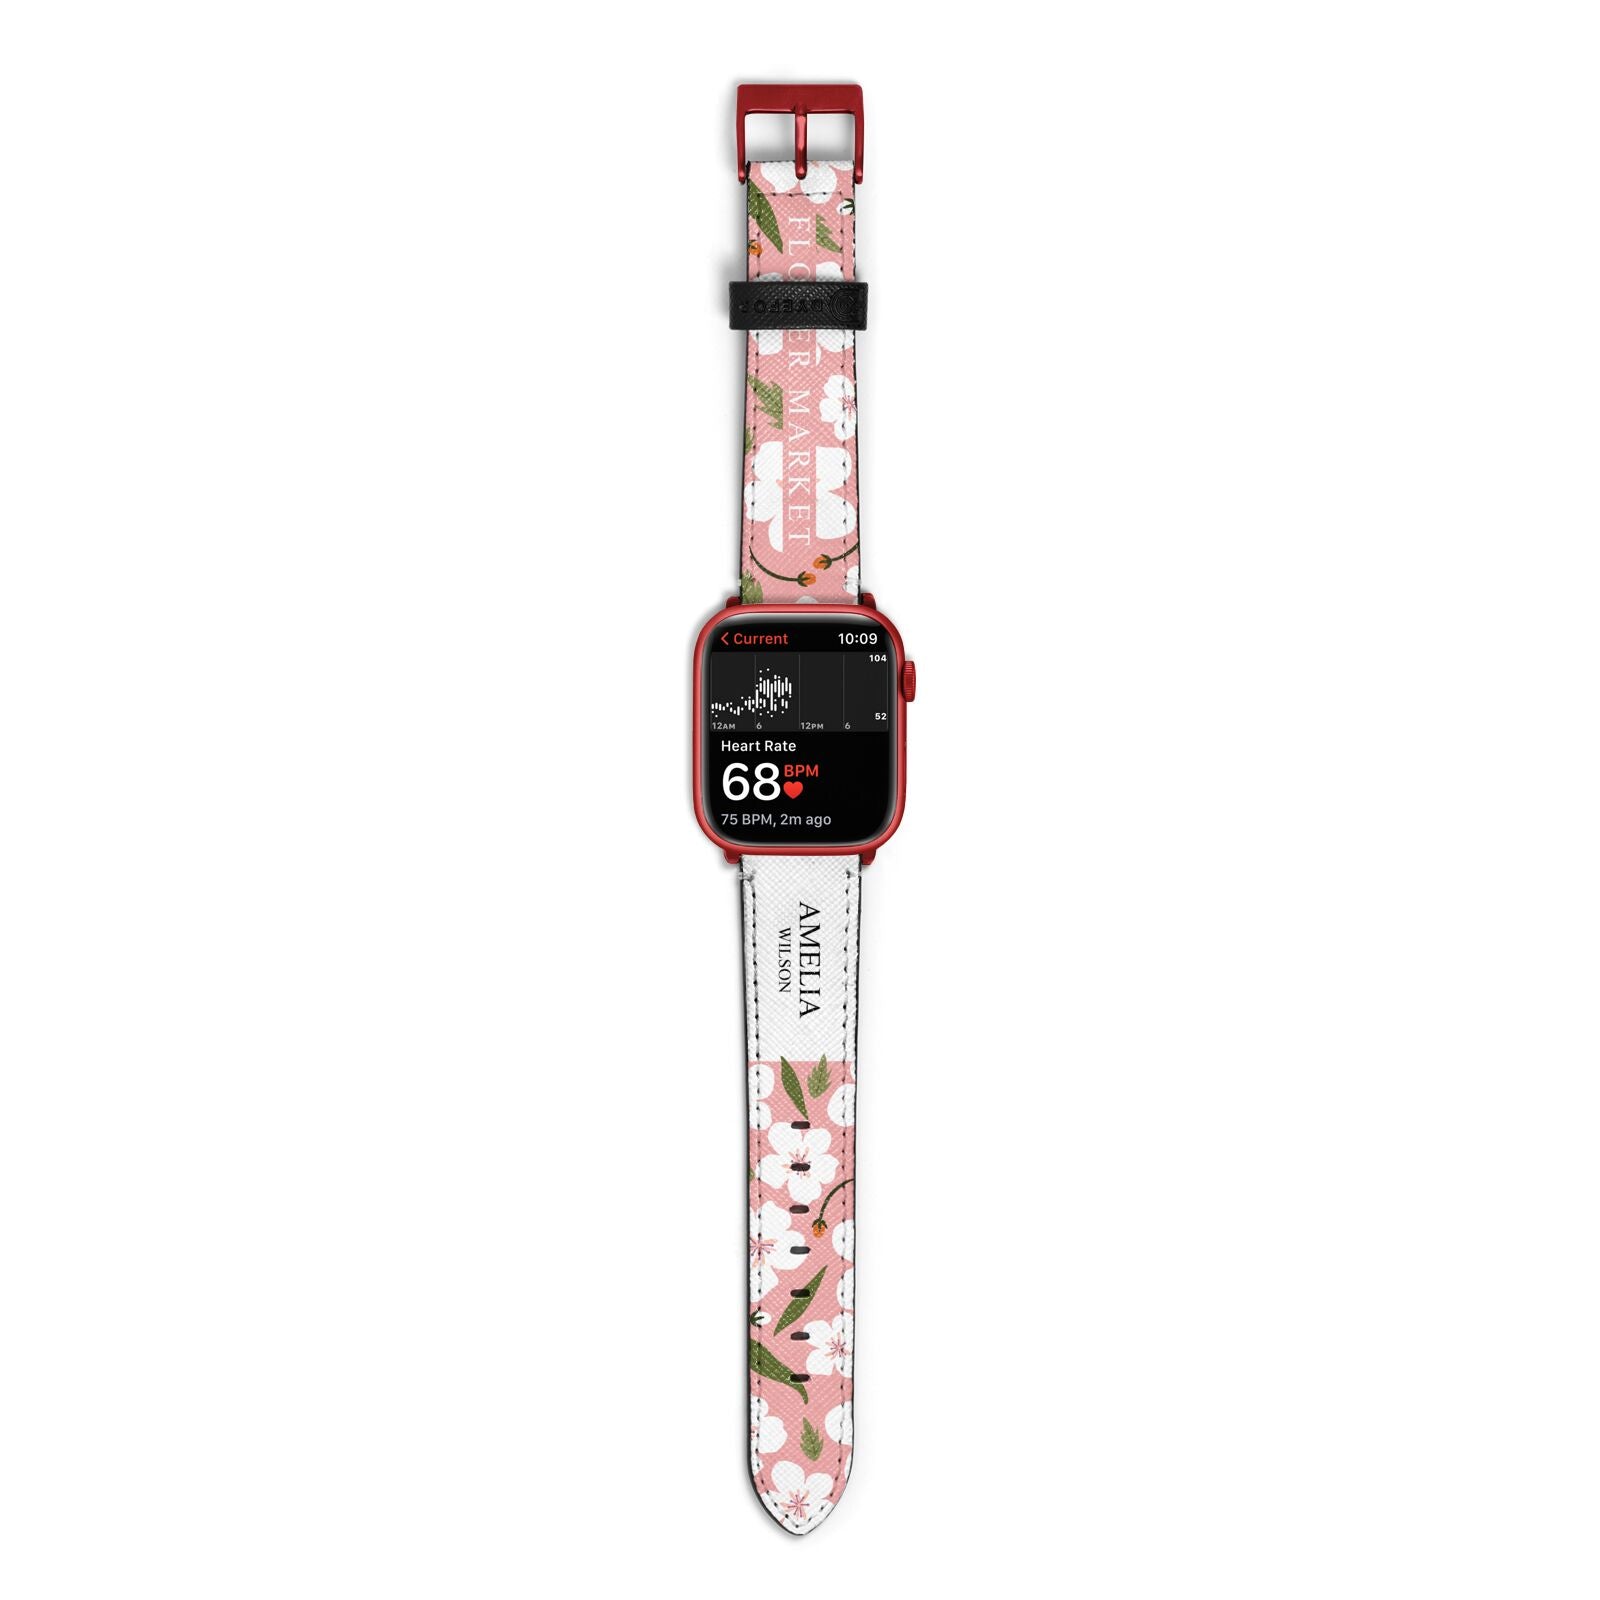 Stockholm Flower Market Poster Apple Watch Strap Size 38mm with Red Hardware